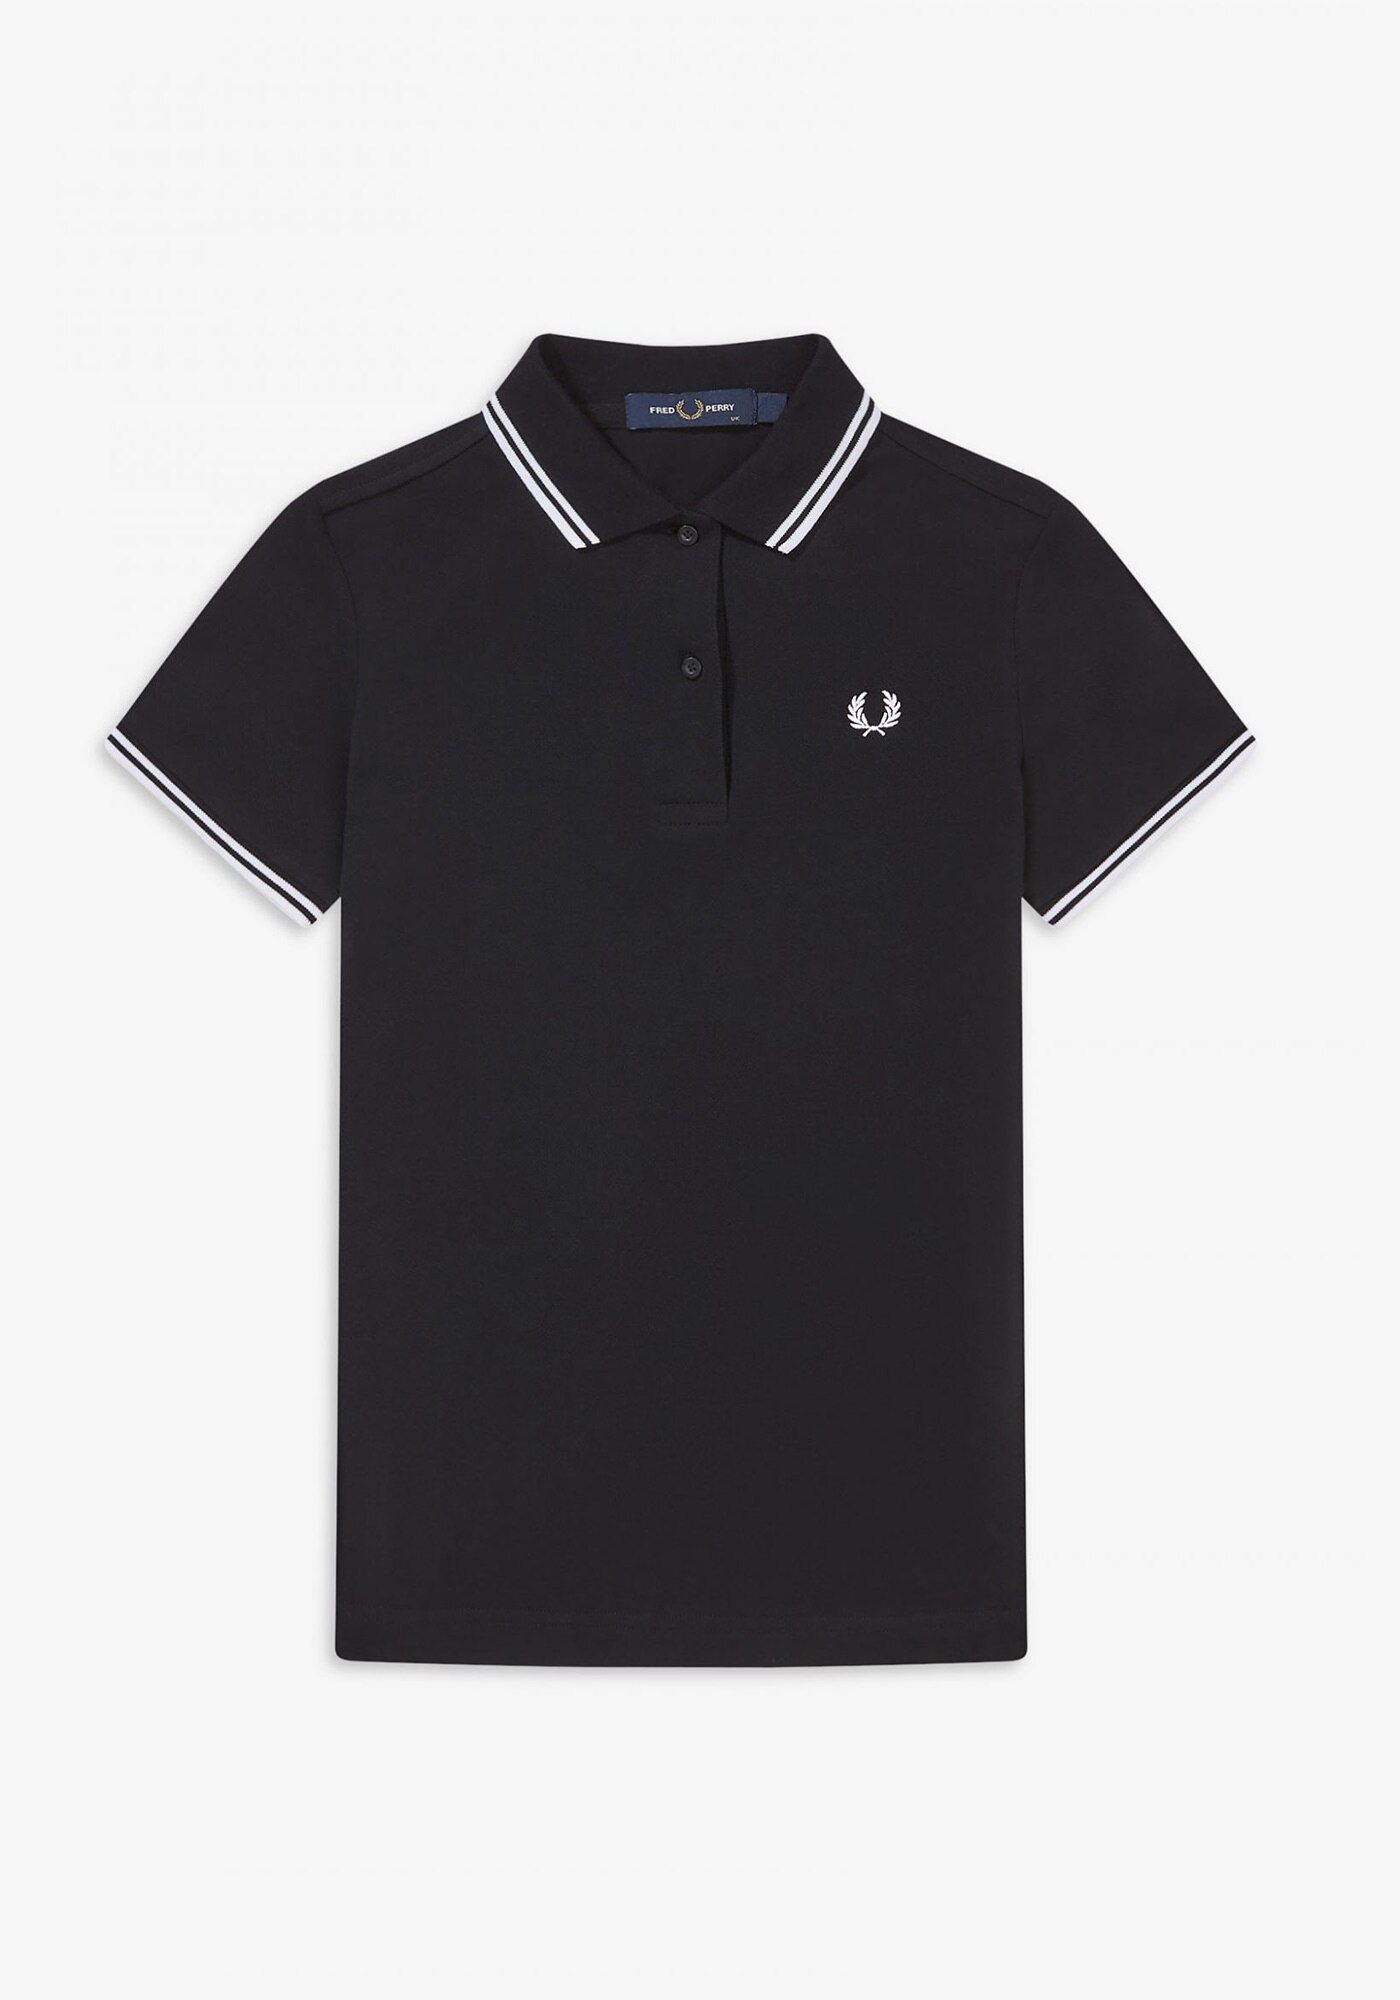 THE FRED PERRY SHIRT - G3600